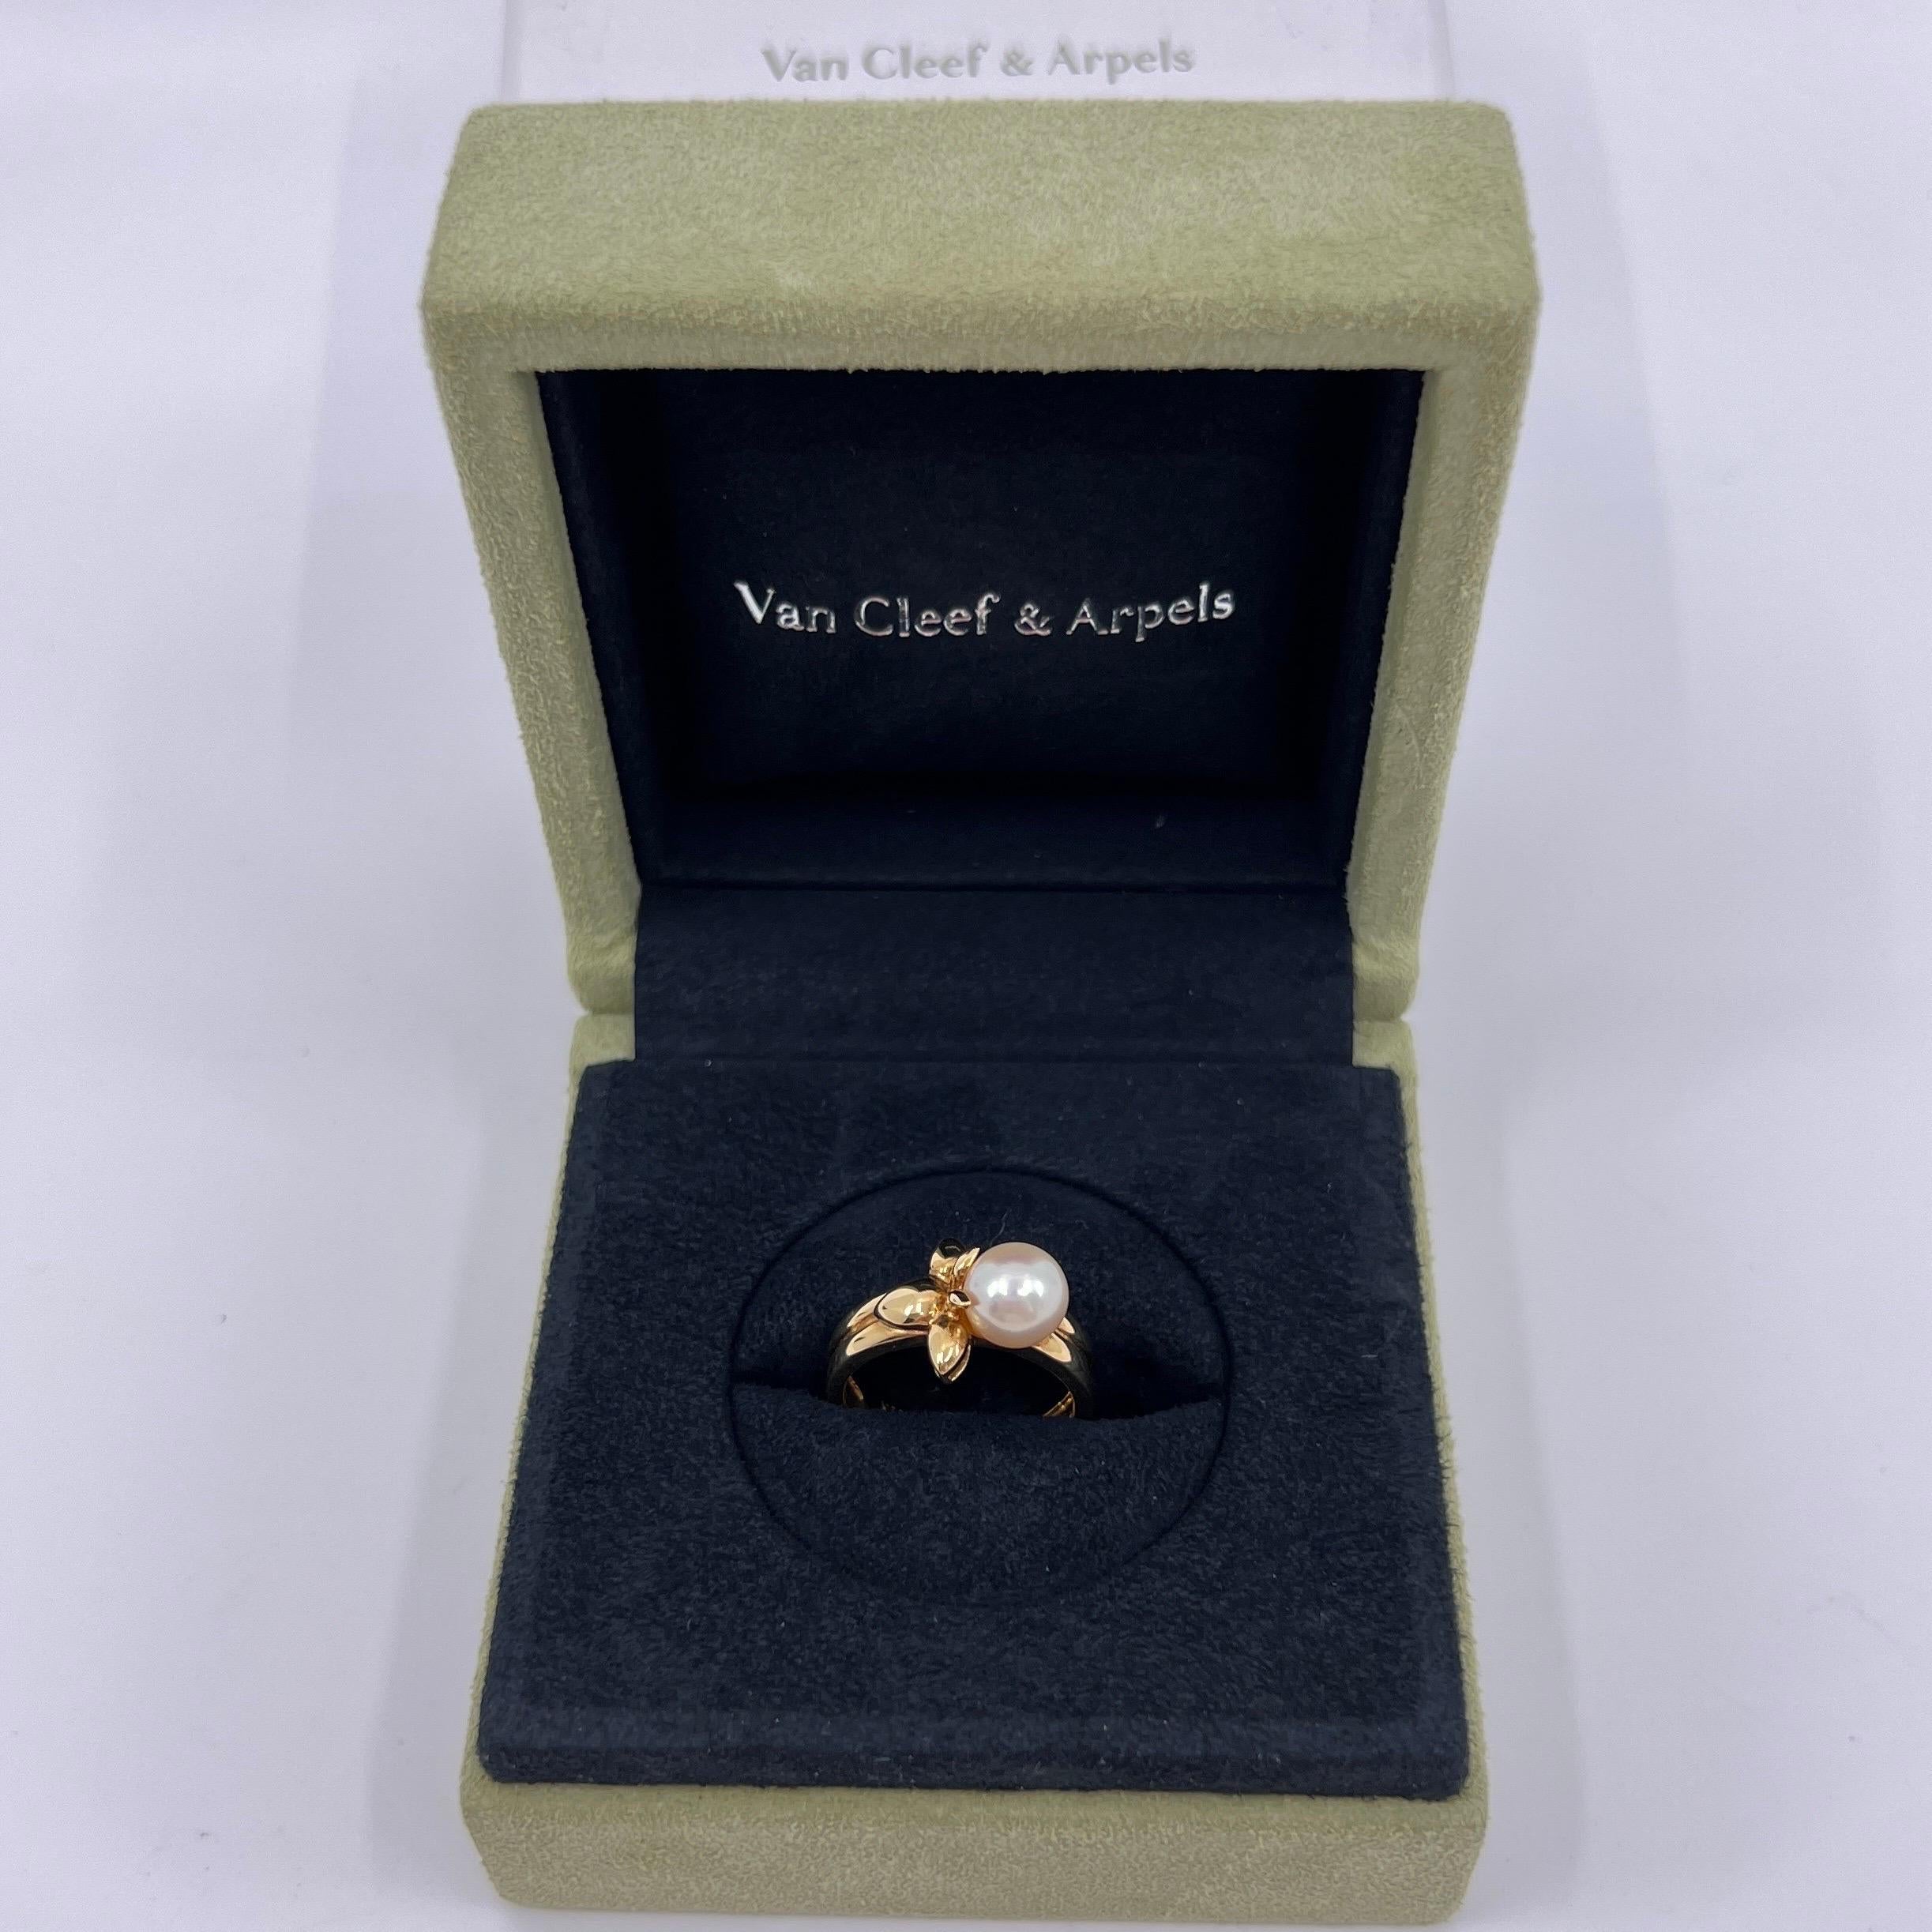 Rare Vintage Van Cleef & Arpels 18 Karat Yellow Gold Pearl Flower Ring.

A stunning vintage Van Cleef & Arpels ring with a flower motif typical of VCA designs and featuring an excellent quality 7mm white cultured pearl.

Fine jewellery houses like